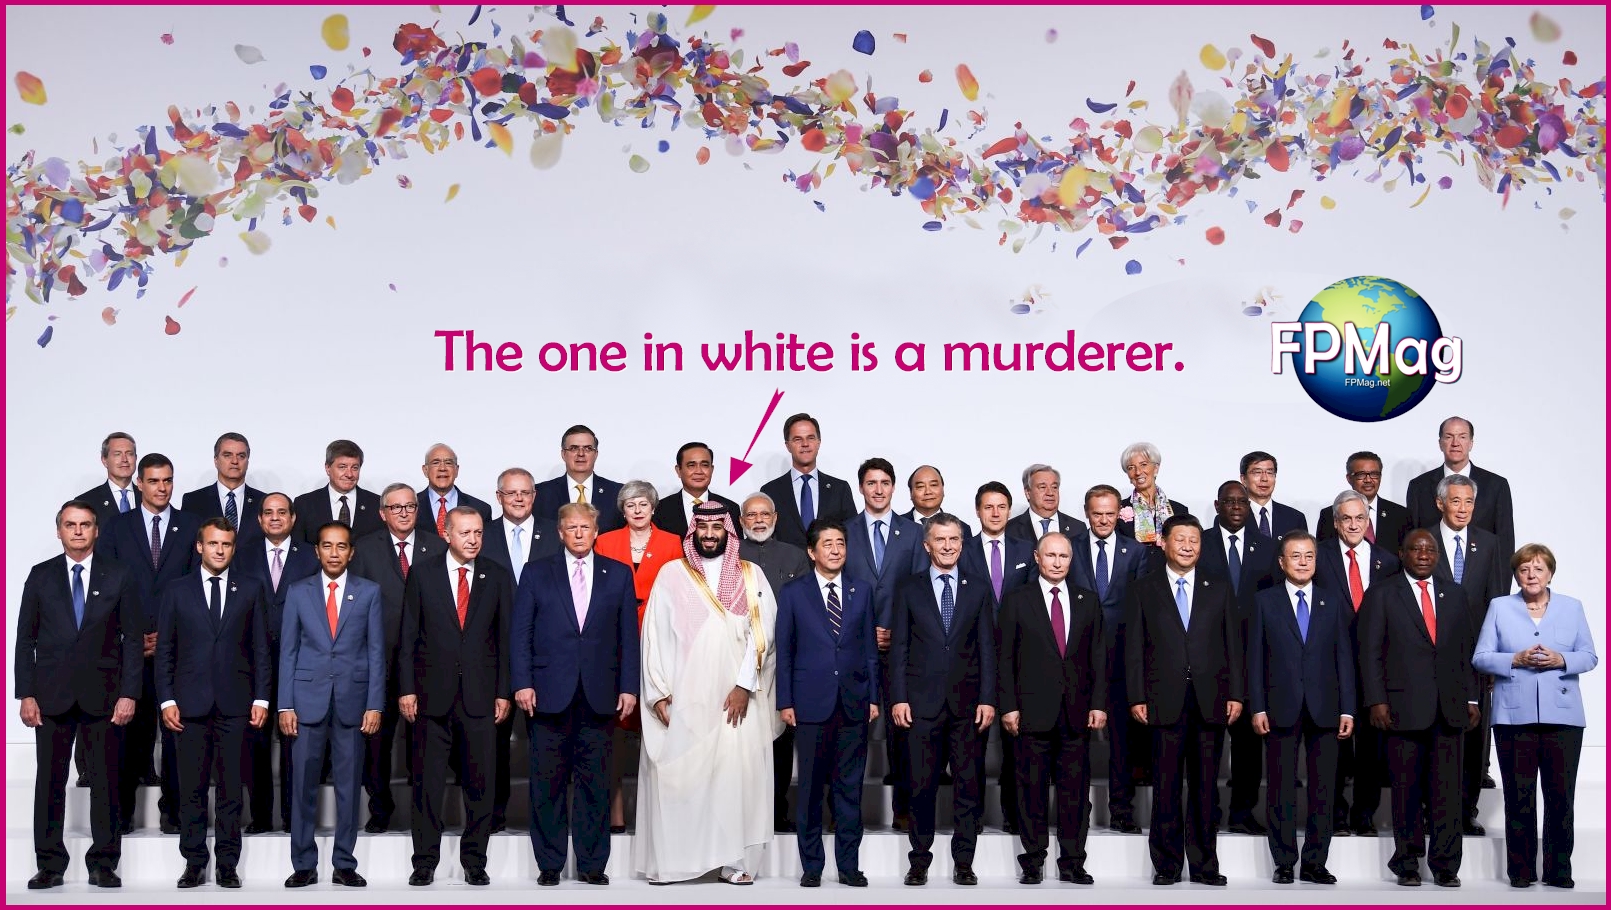 The one in the white, Mohammad bin Salman (MBS) is a murderer.